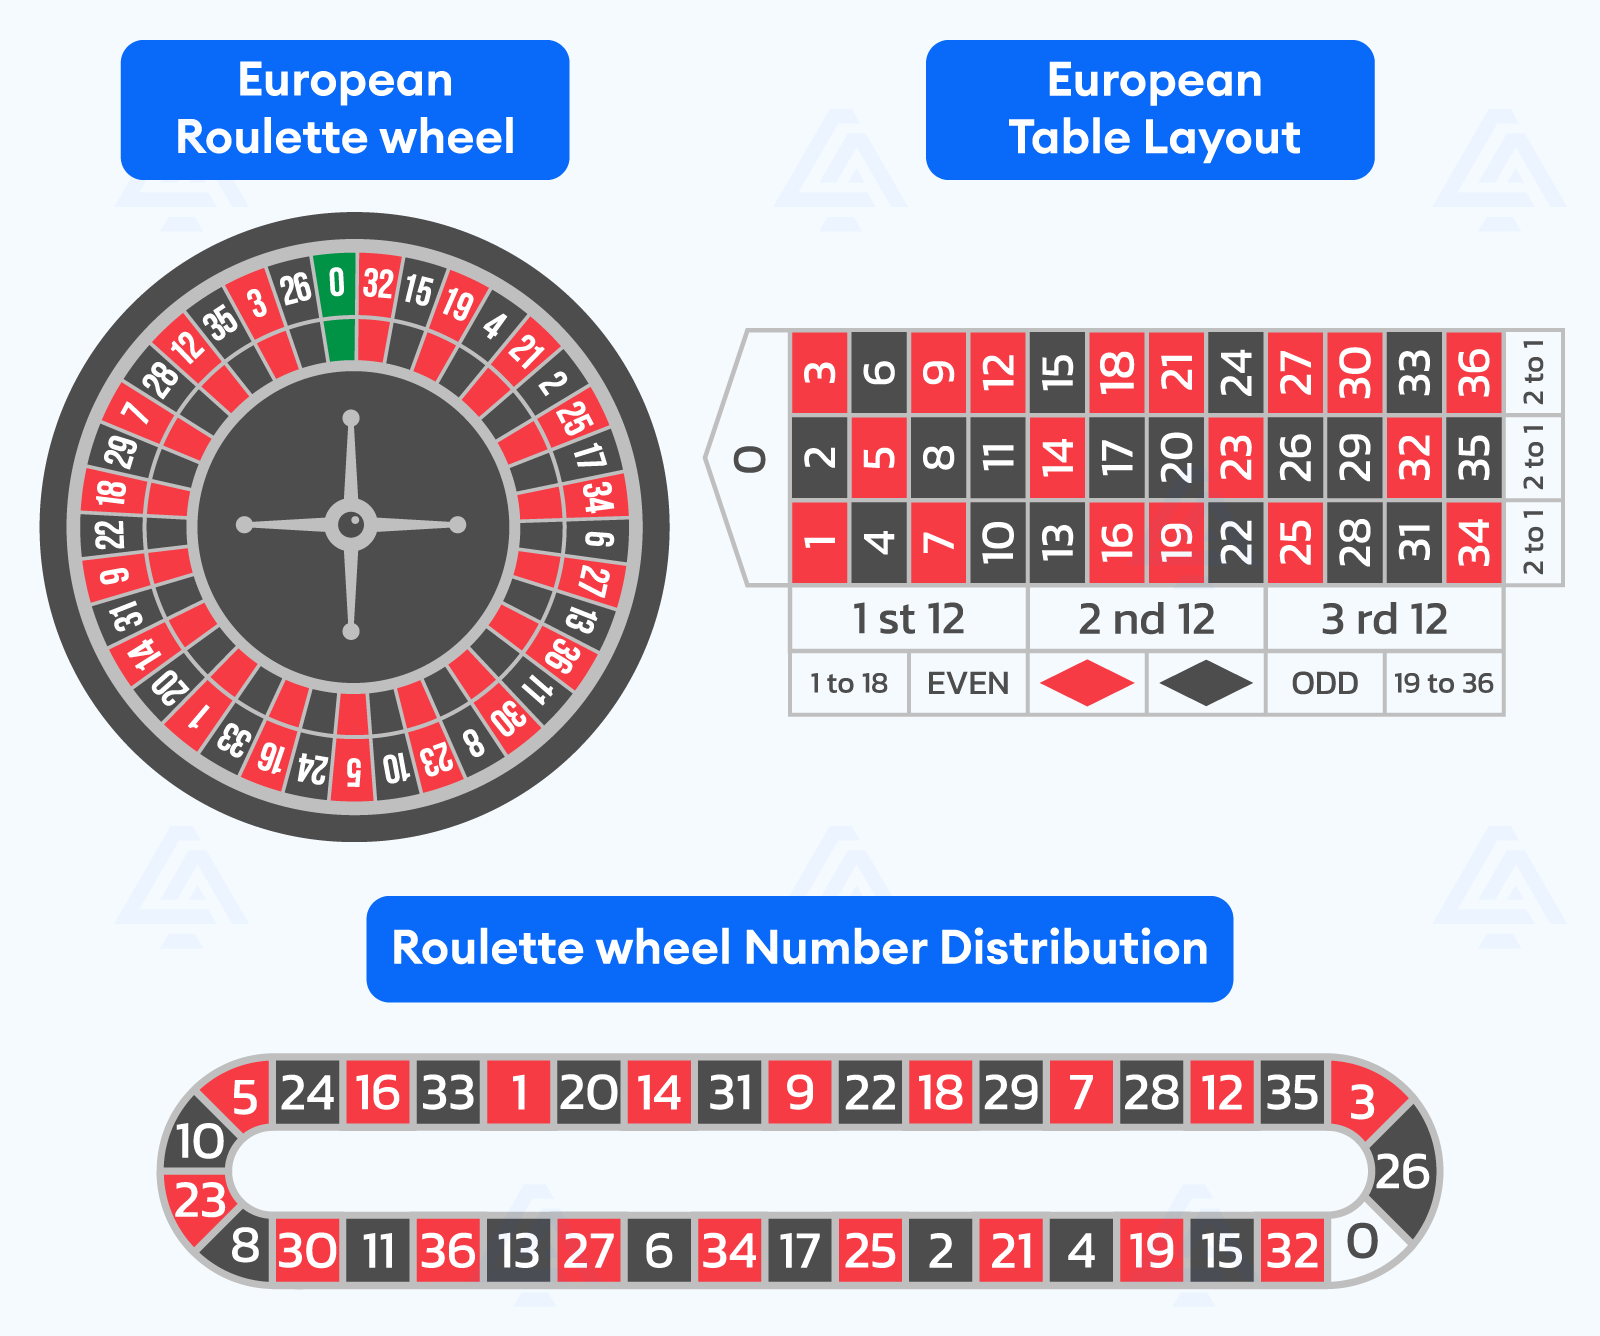 European roulette wheel, table layout and number distribution